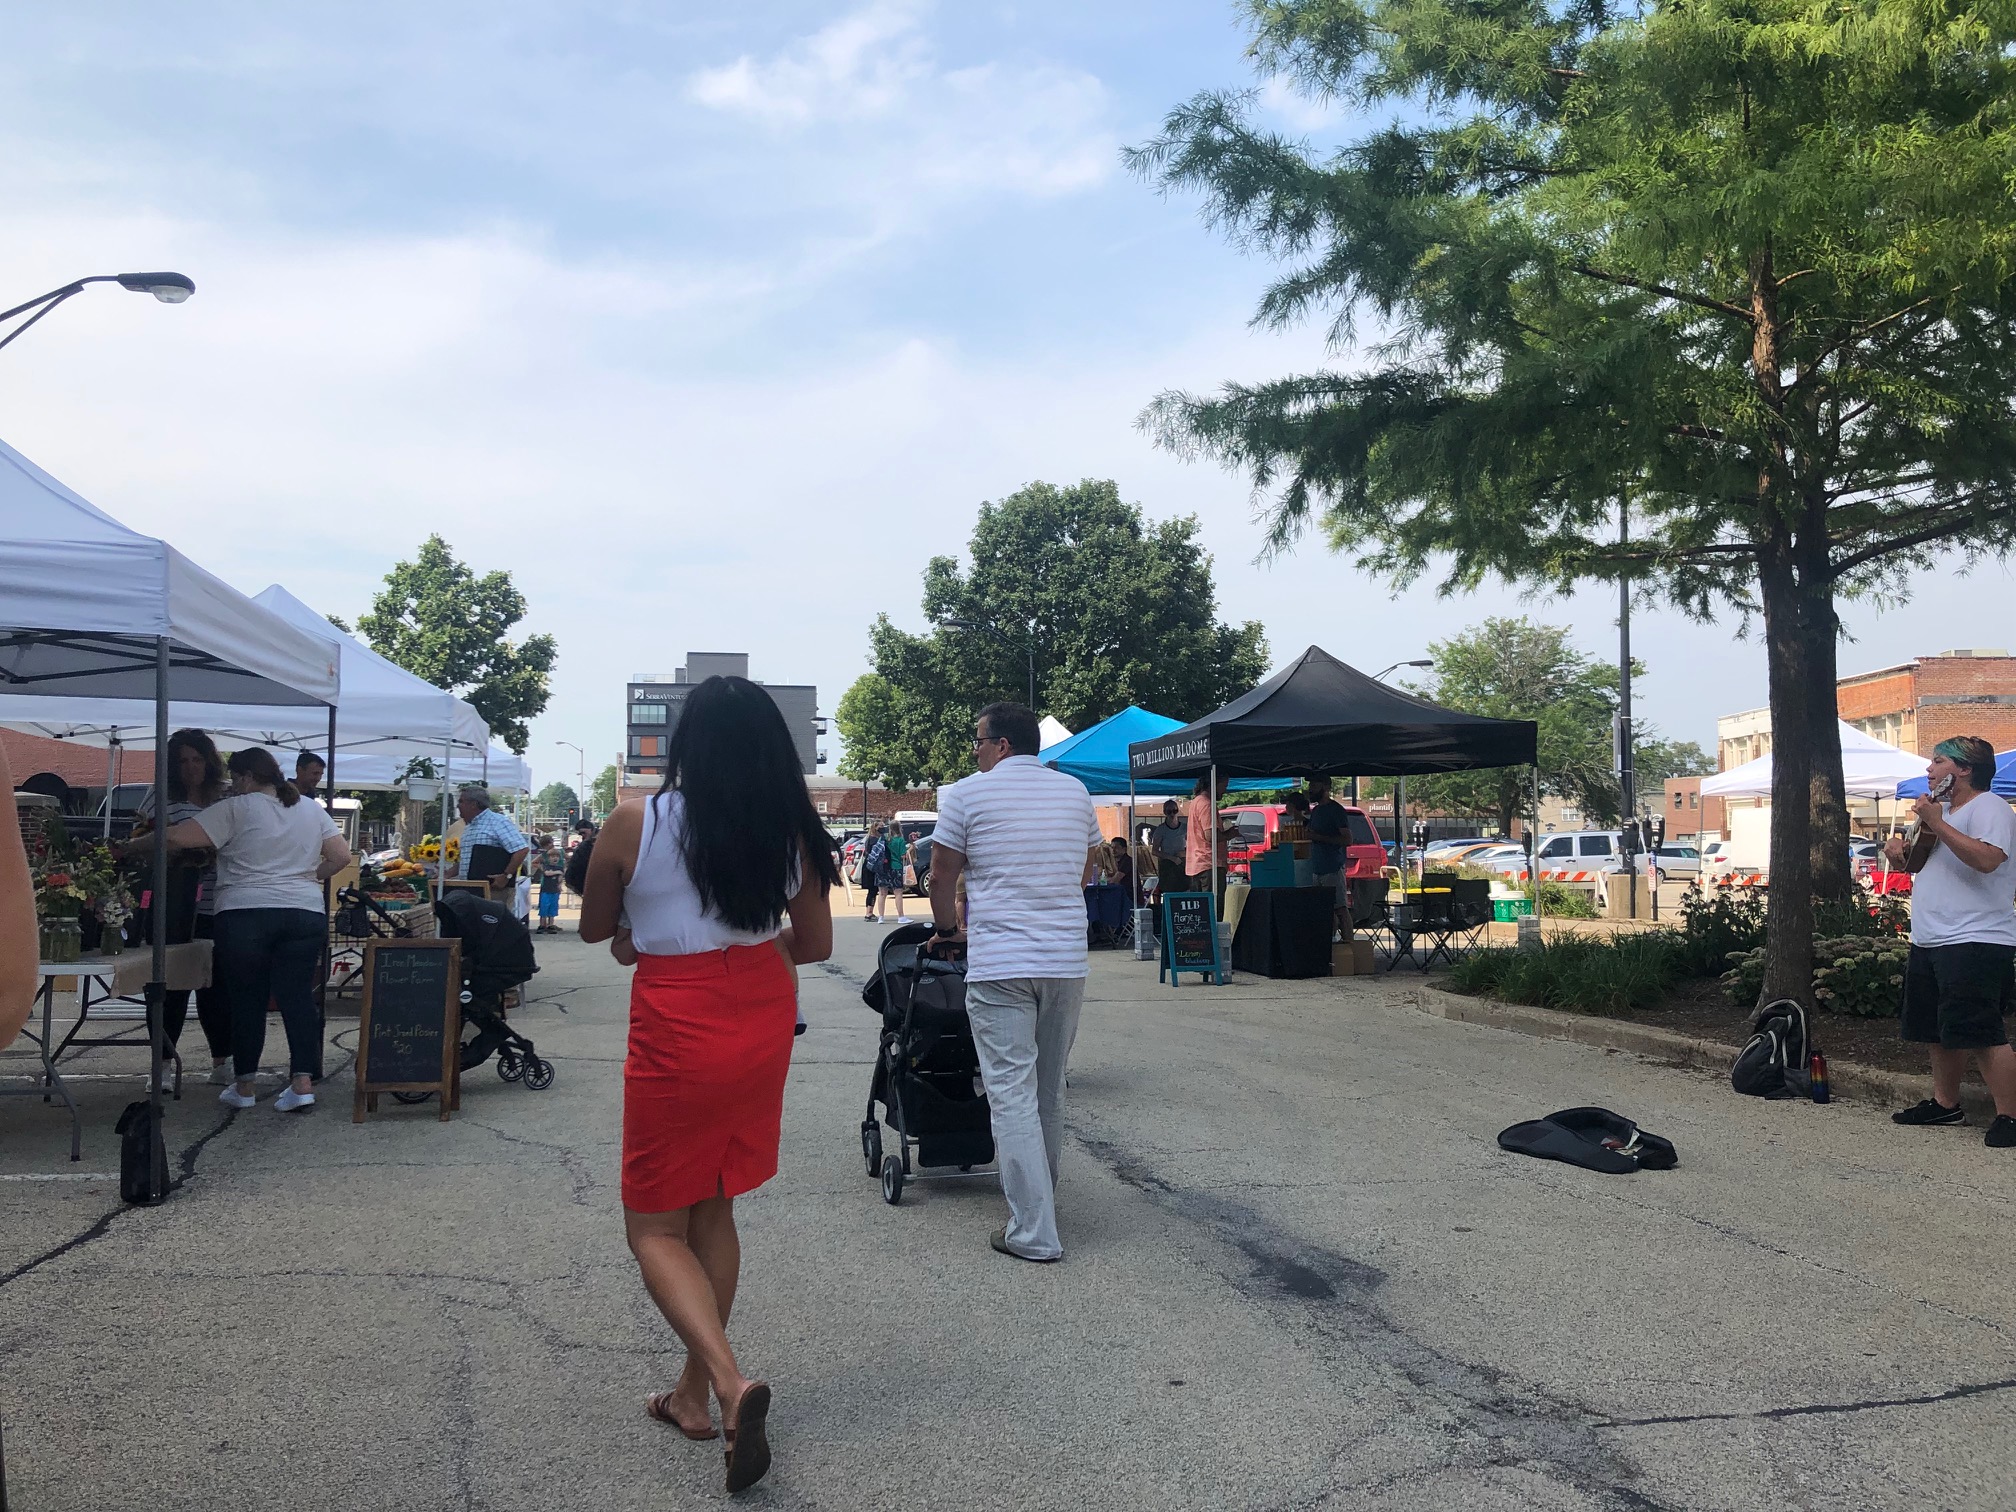 At the Champaign Farmers' Market, there is a couple walking and looking at the vendors of the market. The man is pushing a black stroller, and the woman in a yellow dress is carrying a baby. Photo by Alyssa Buckley.